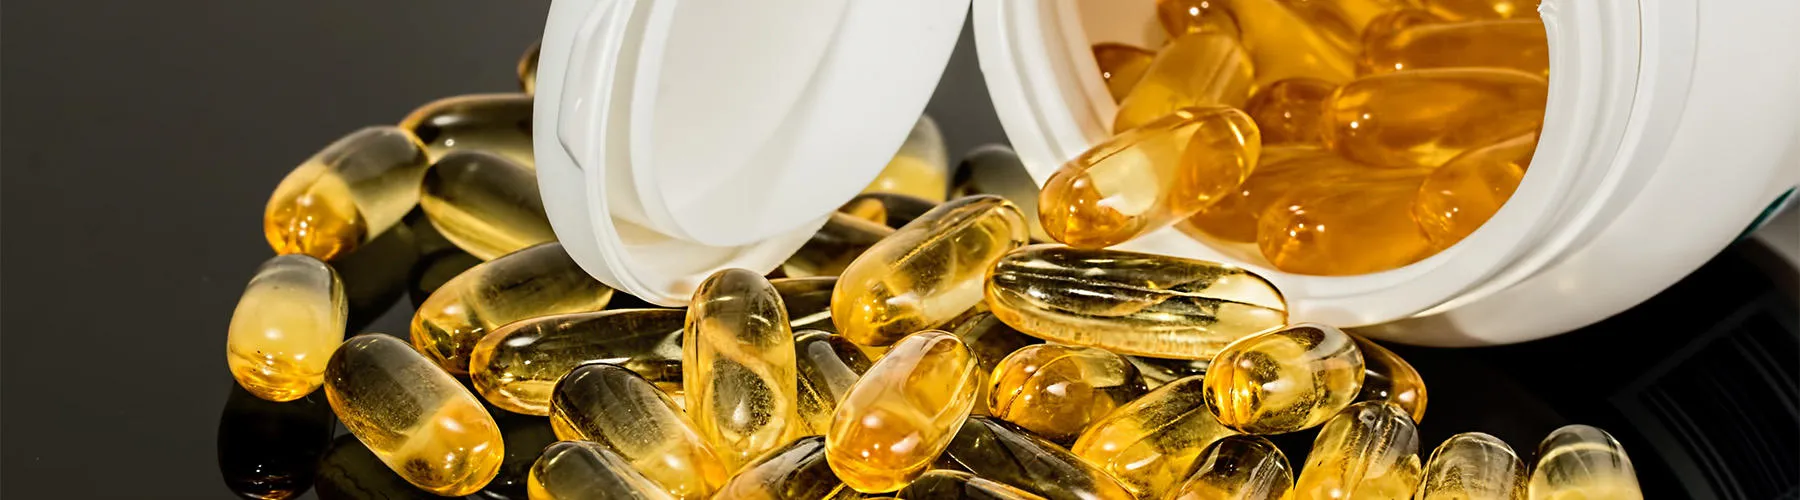 Omega 3 Fish Oil As Effective For Attention As Drugs For Some Children With Adhd Feature From King S College London